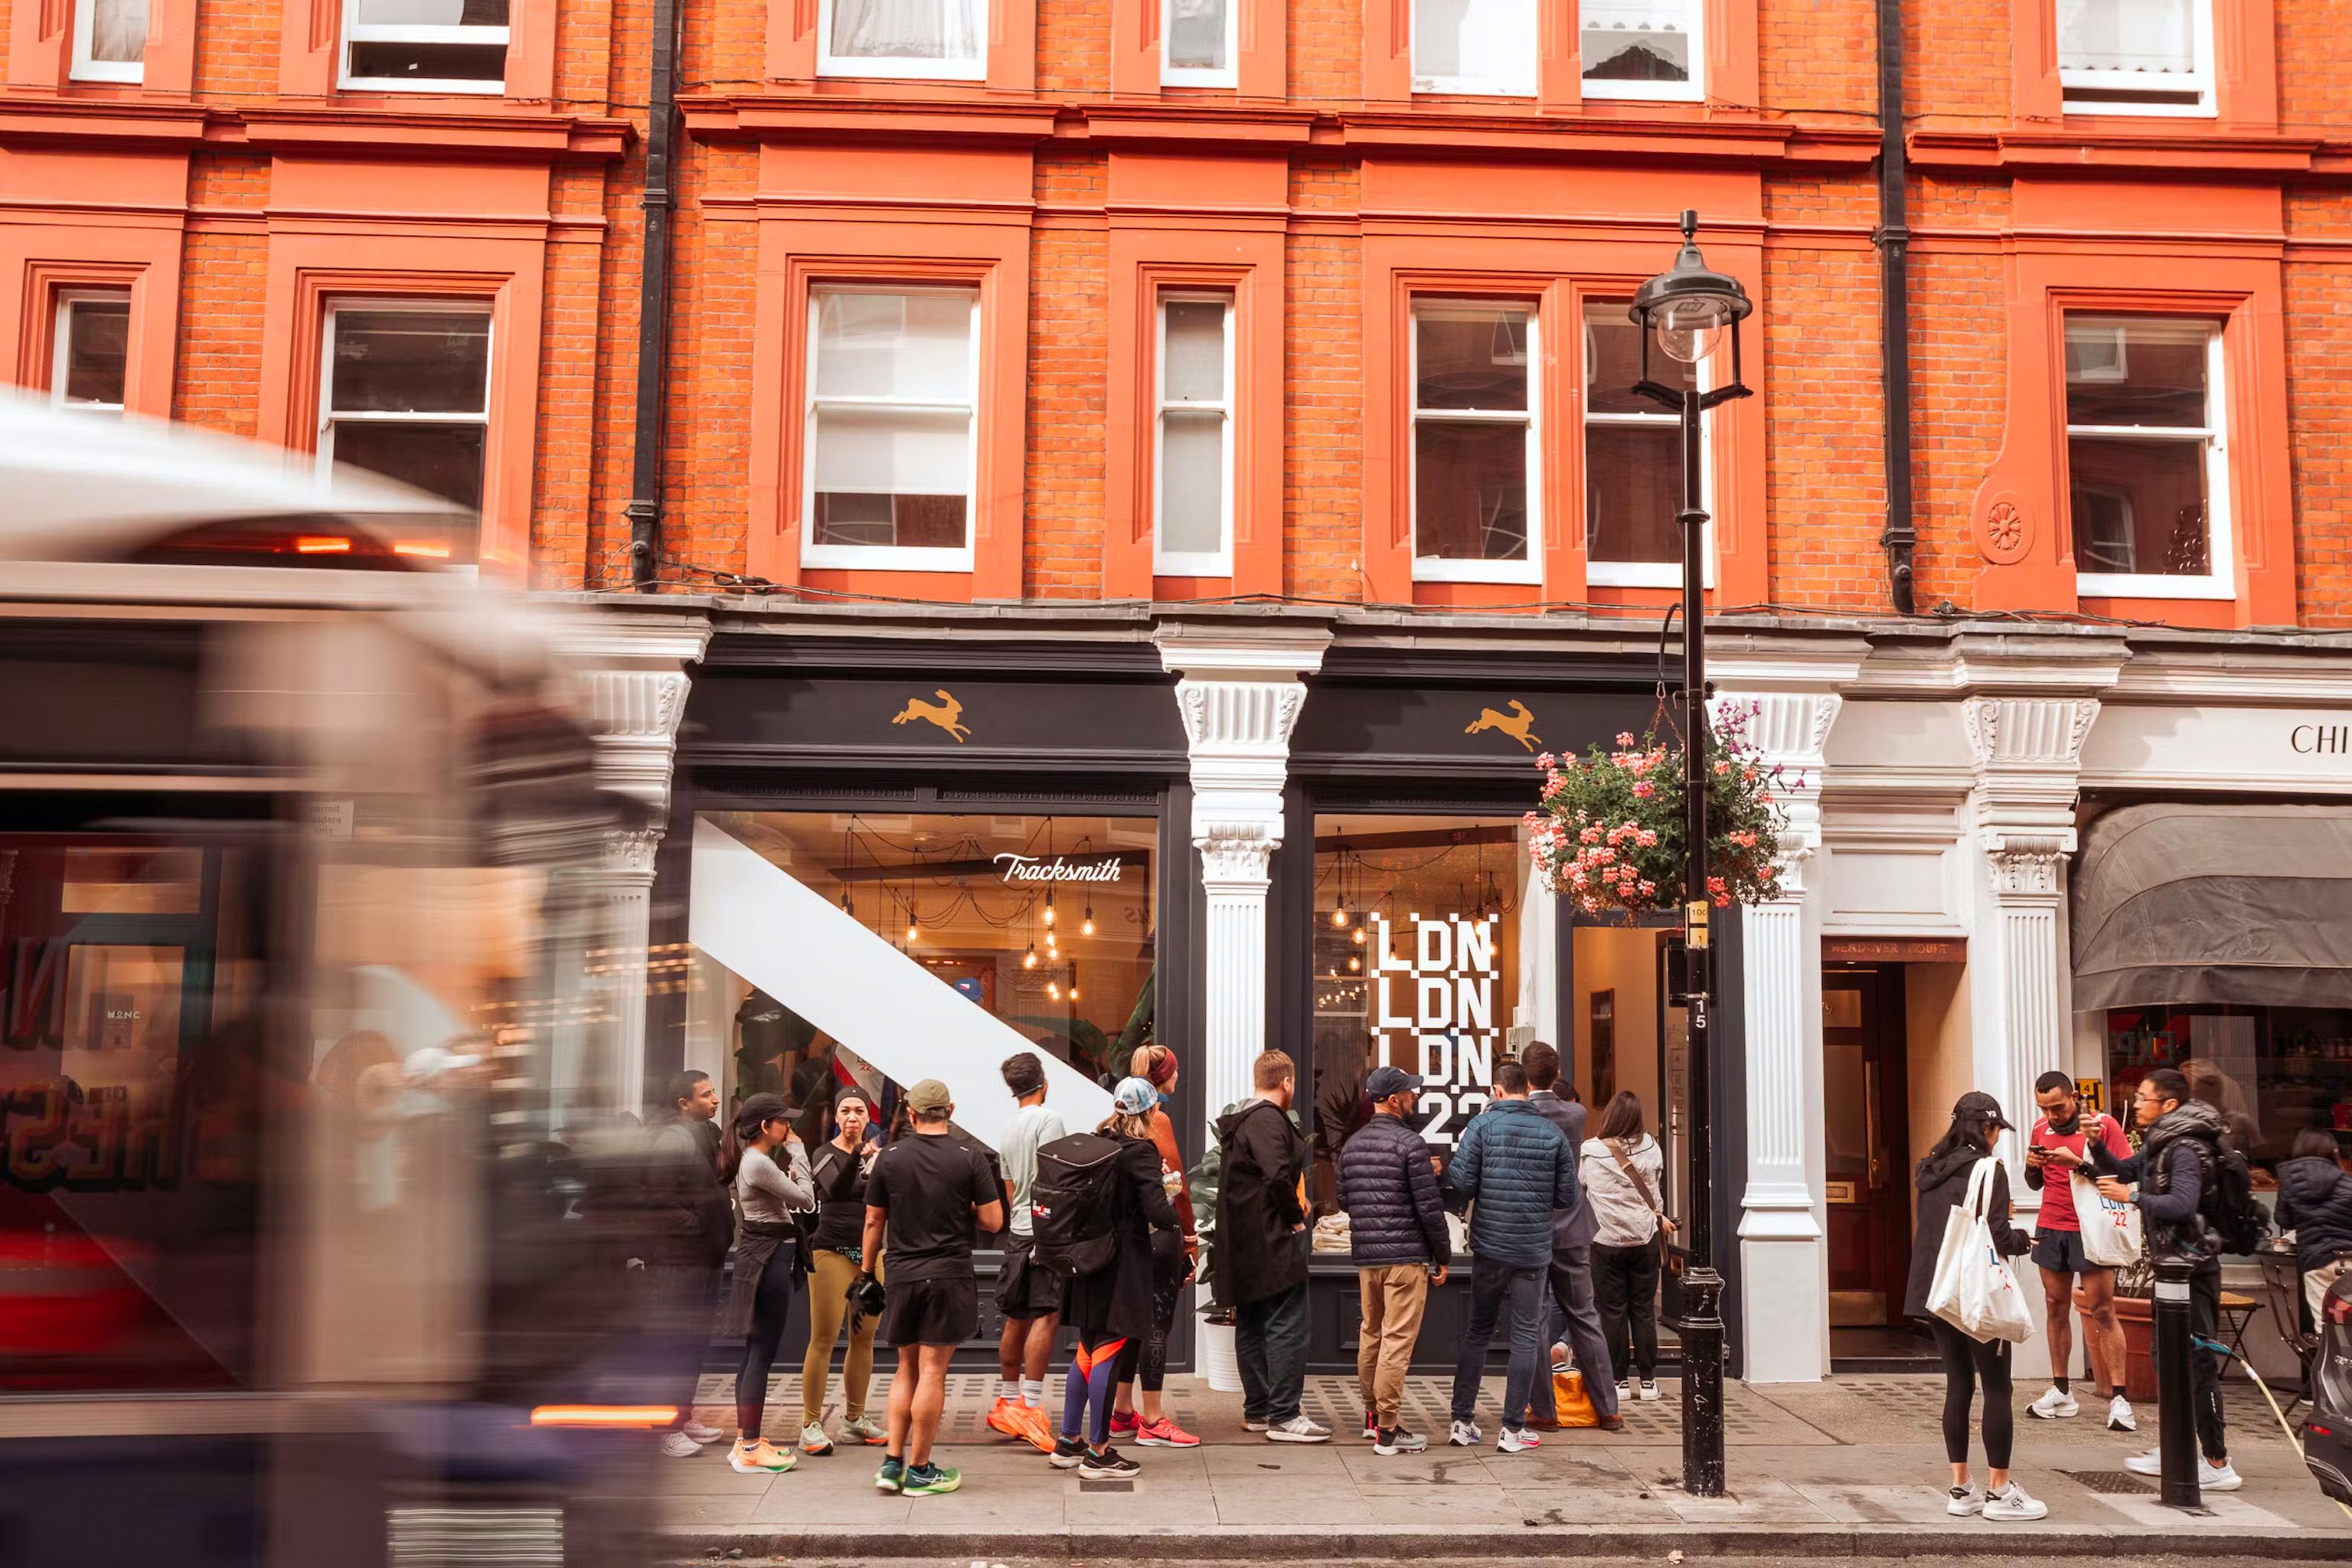 Running shops London: Our pick of the best